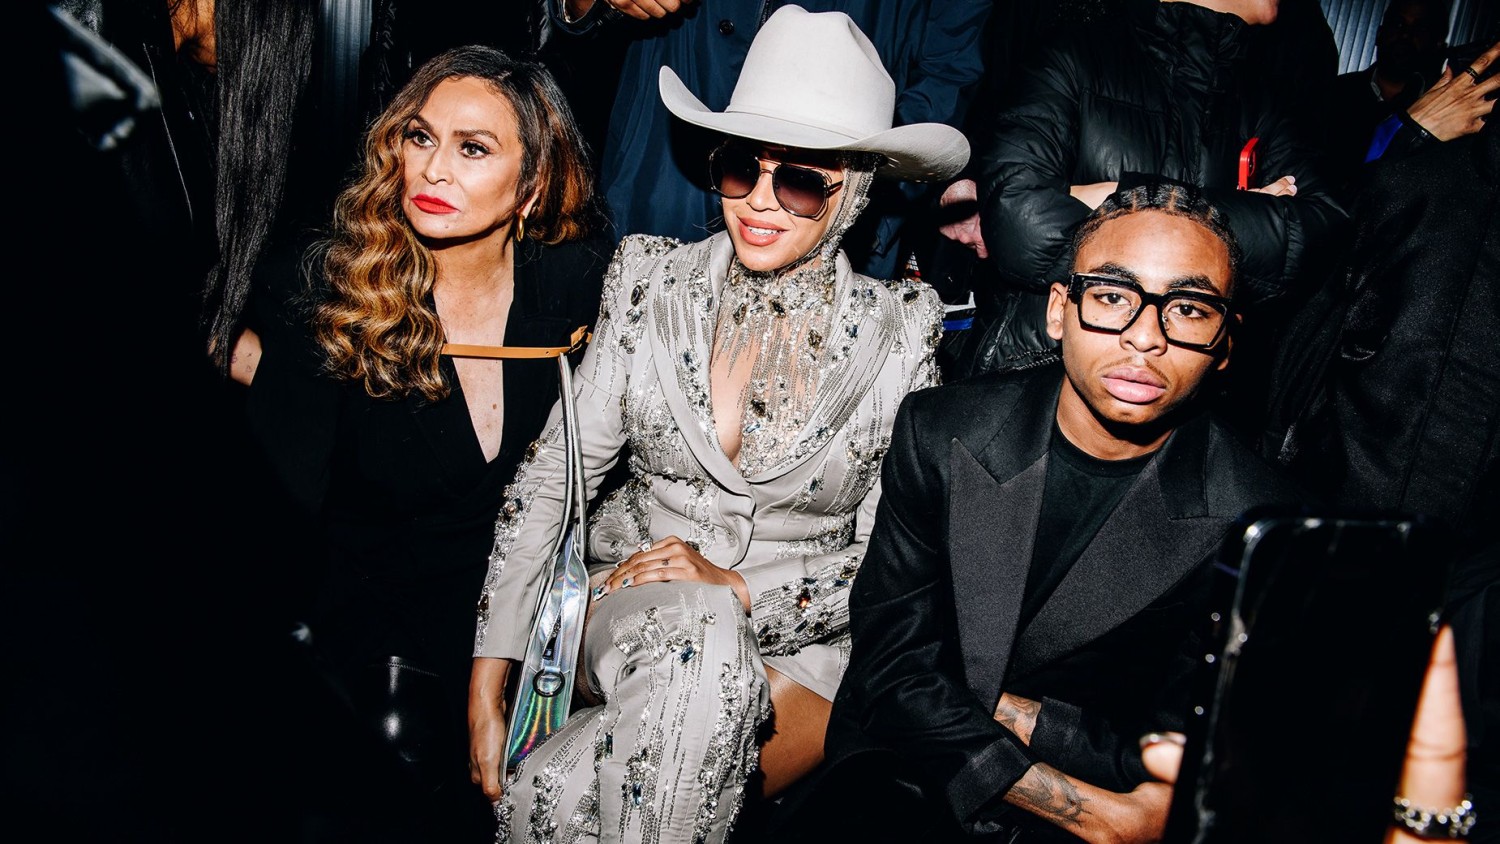 See what celebrities wore to New York Fashion Week, including Beyoncé’s surprise appearance in Brooklyn